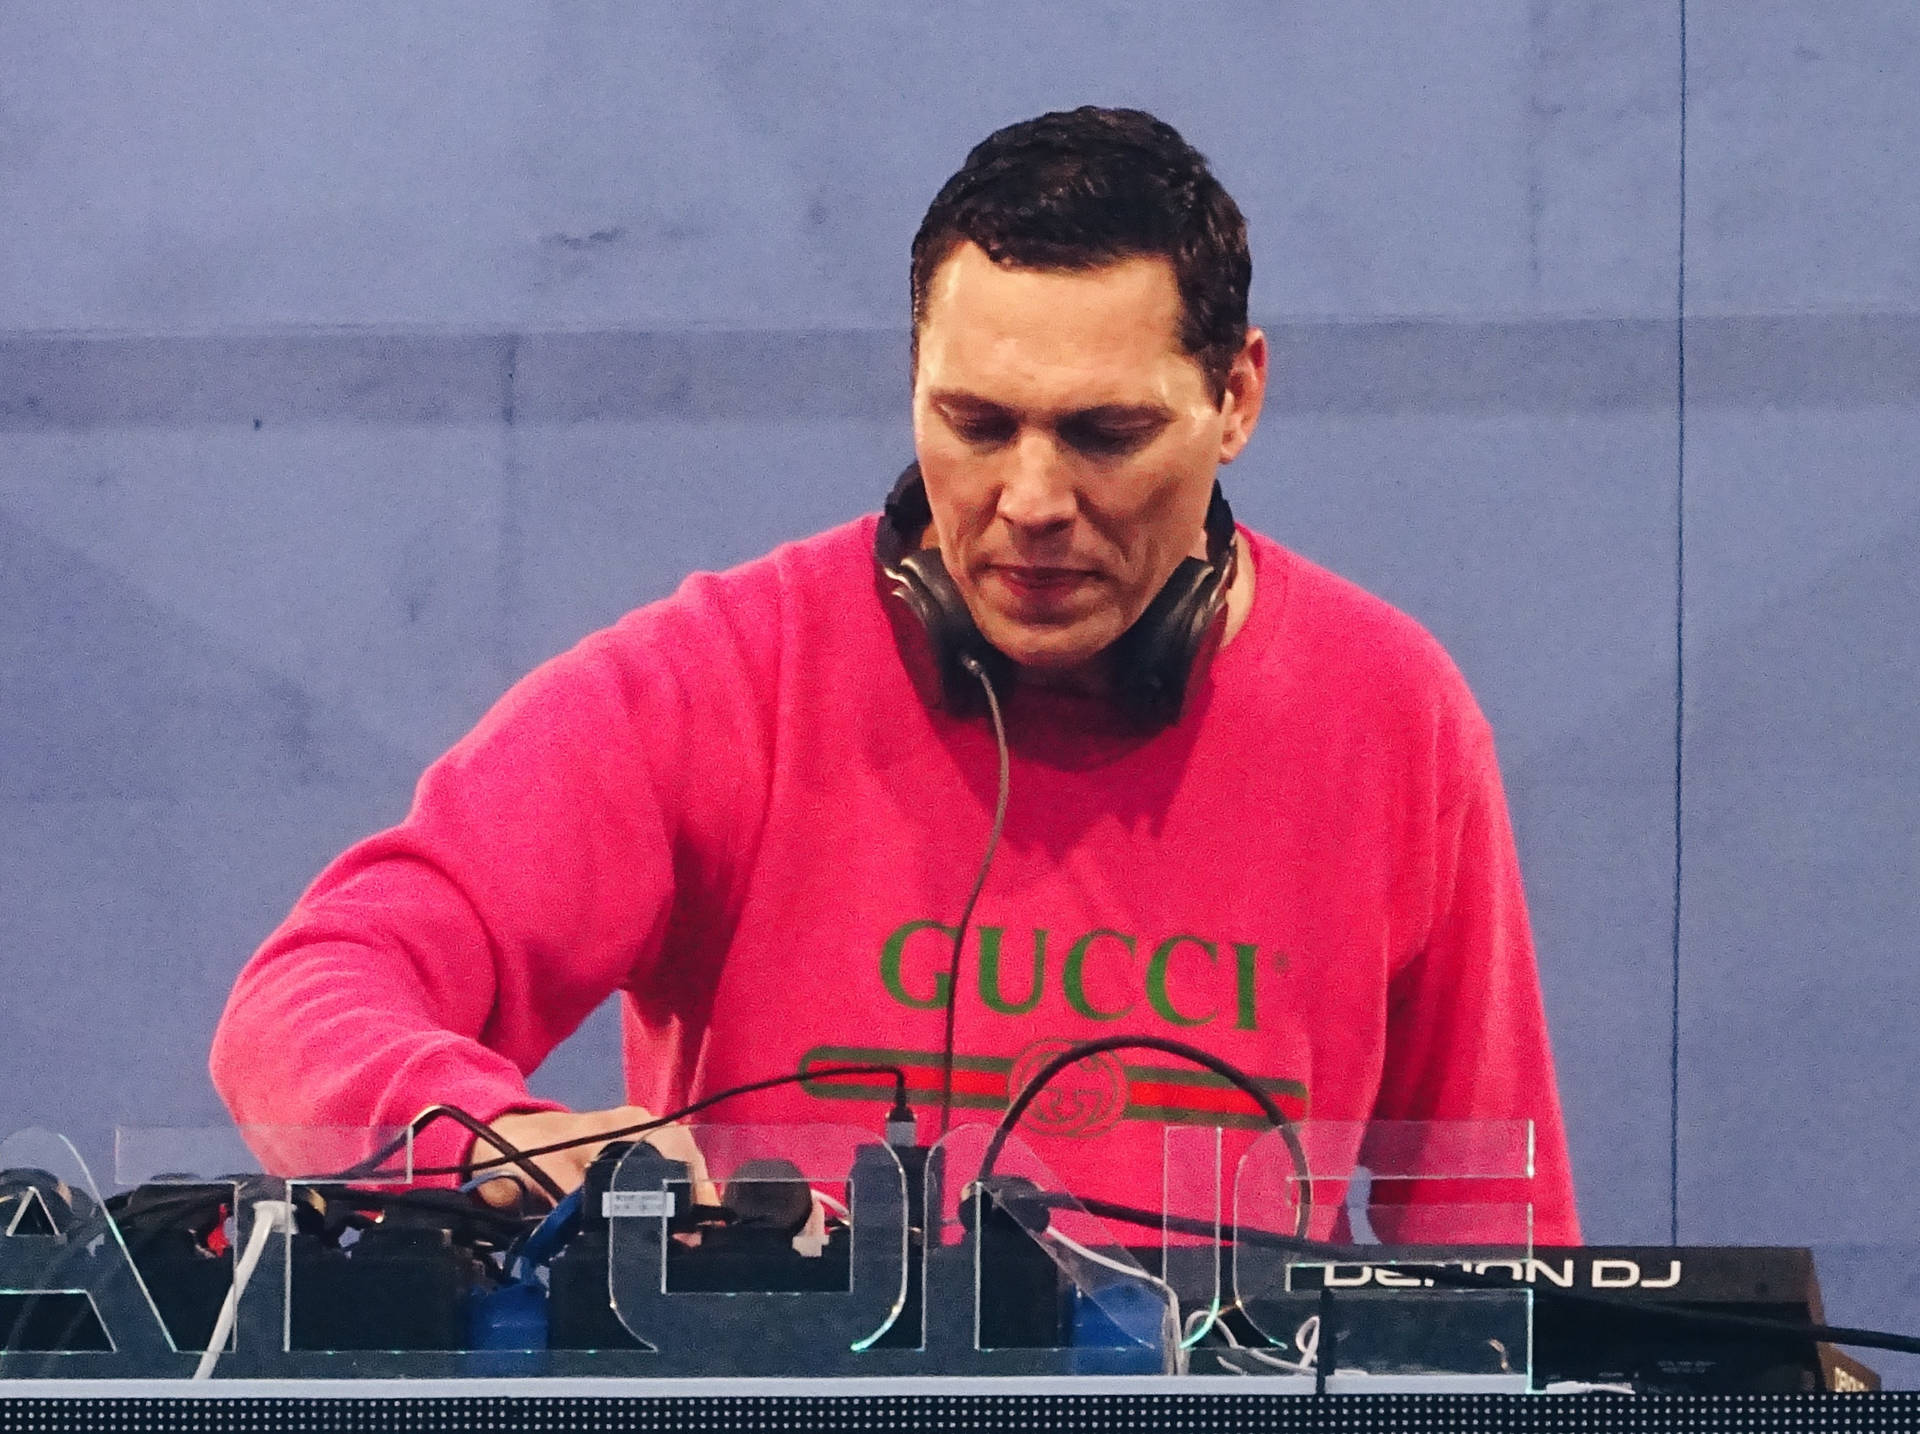 Tiesto At Airbeat-one 2017 Background